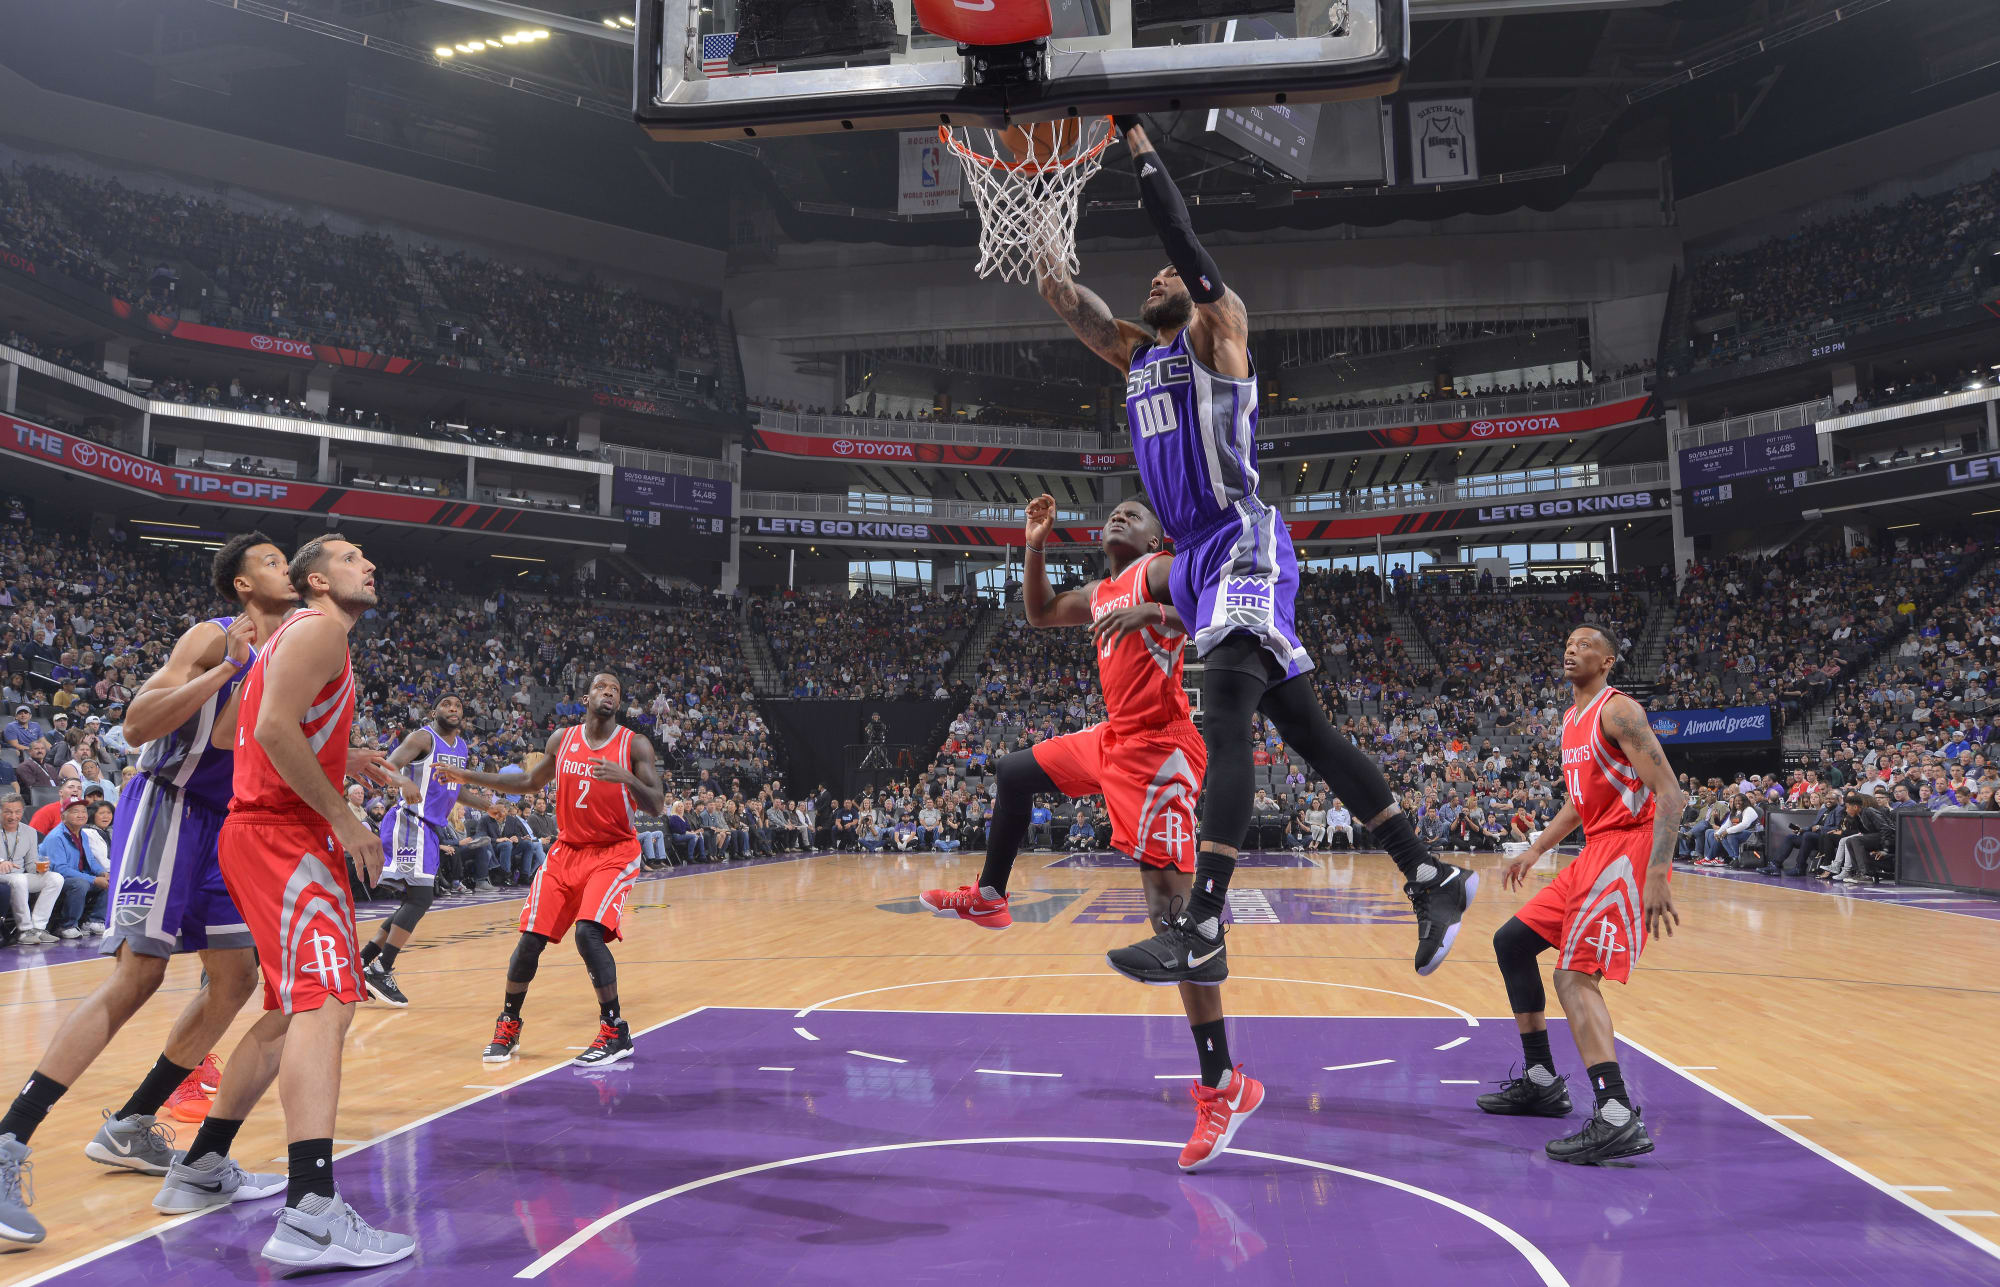 Sacramento Kings vs Houston Rockets game 1 How to watch online